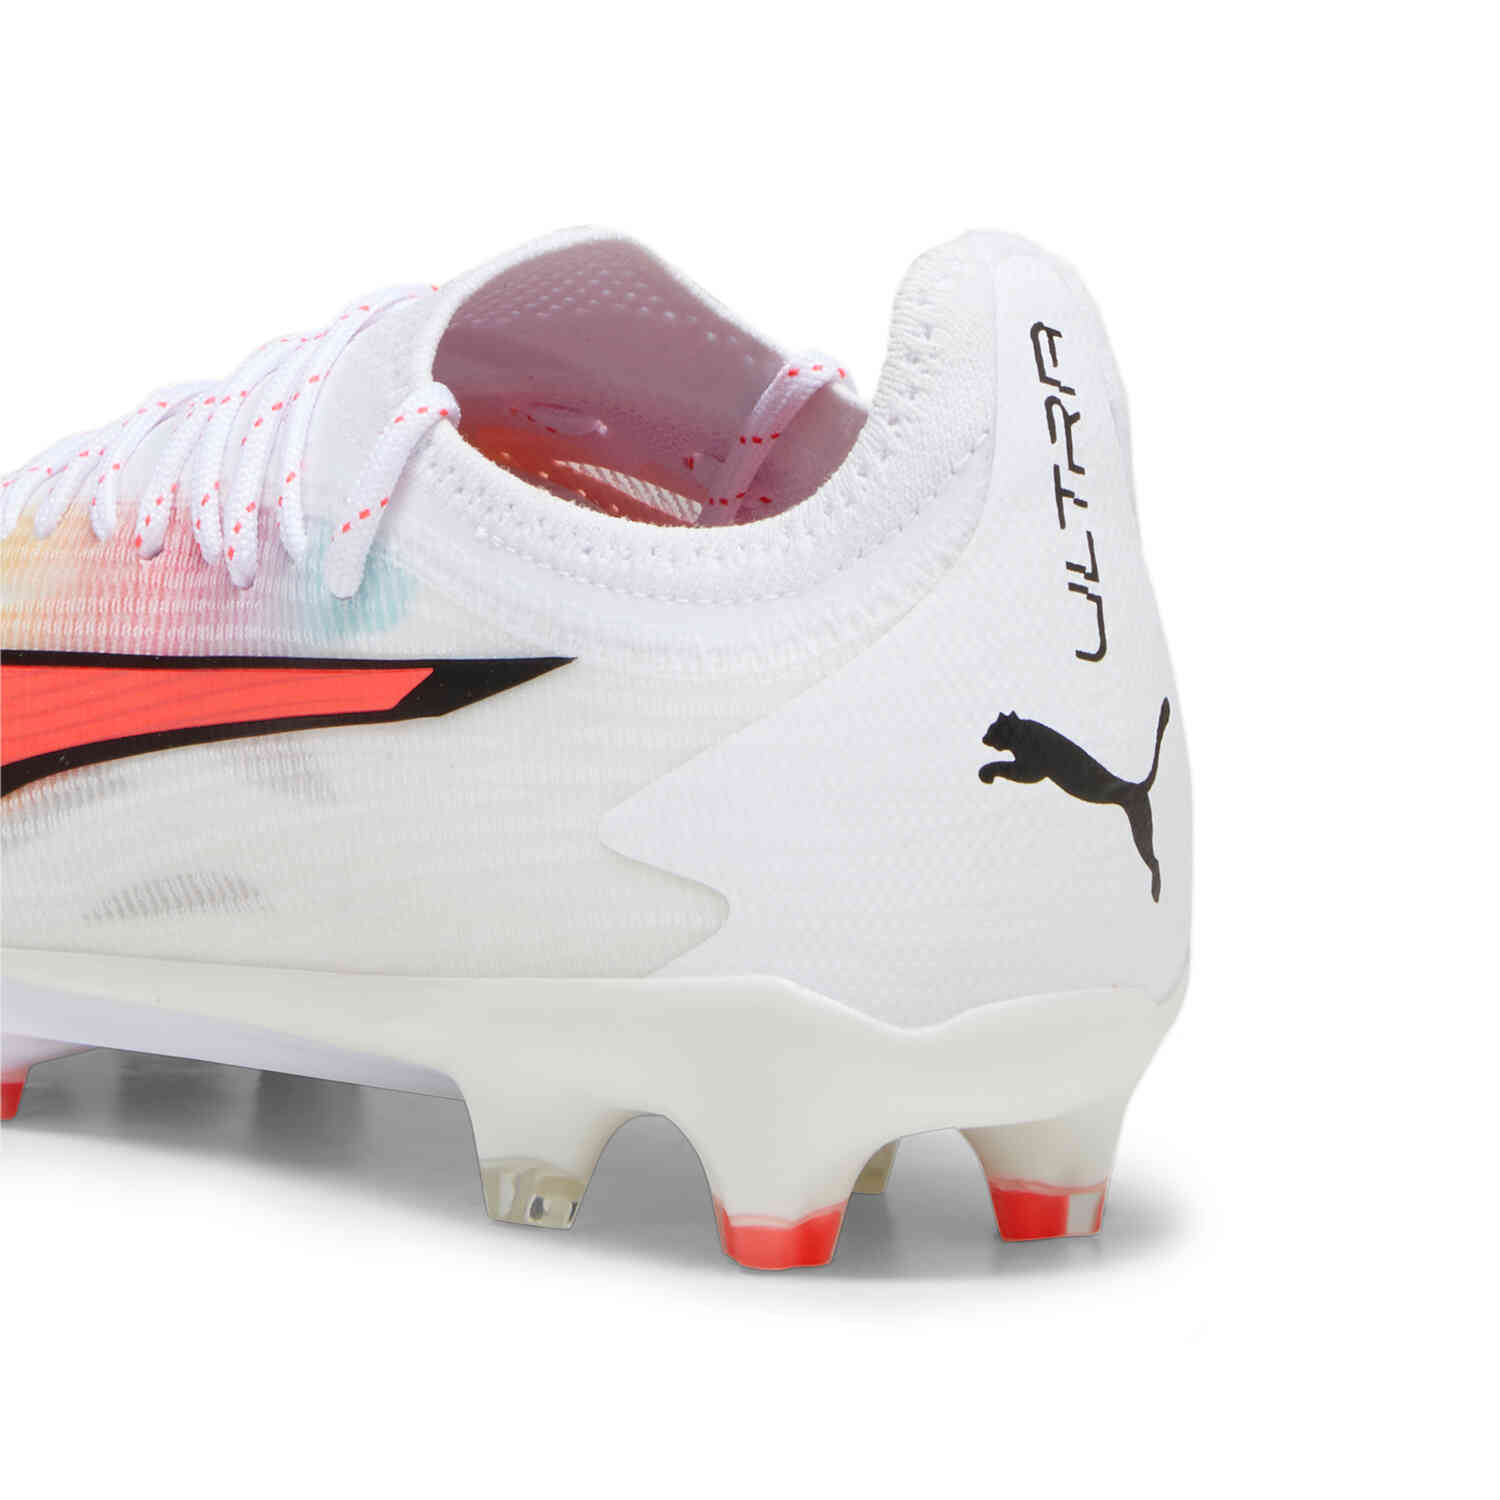 PUMA ULTRA ULTIMATE FG/AG Soccer White, - Fire - Master Black Cleats Orchid Soccer 